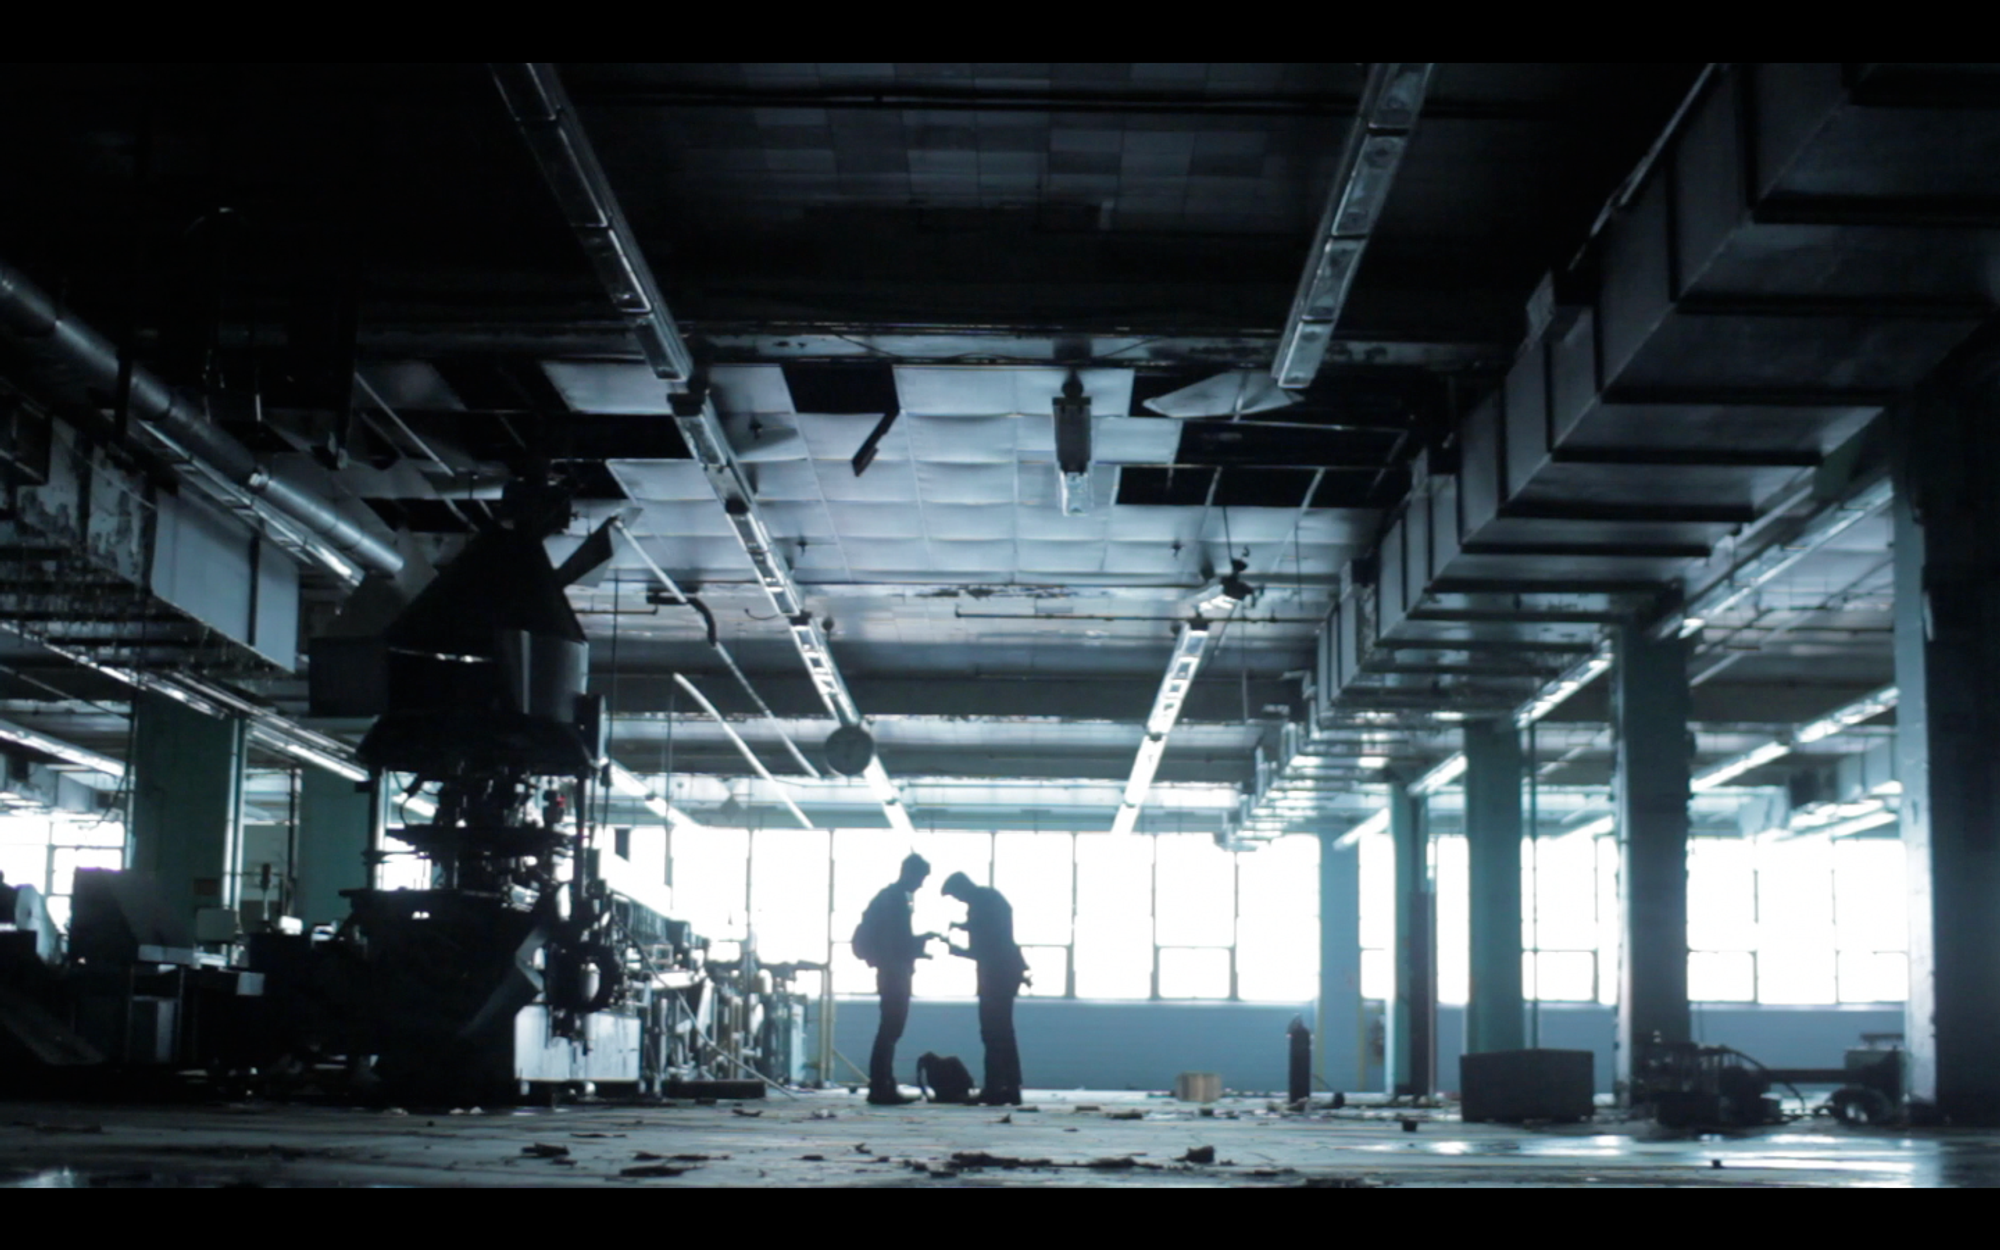 Two people standing in an empty warehouse